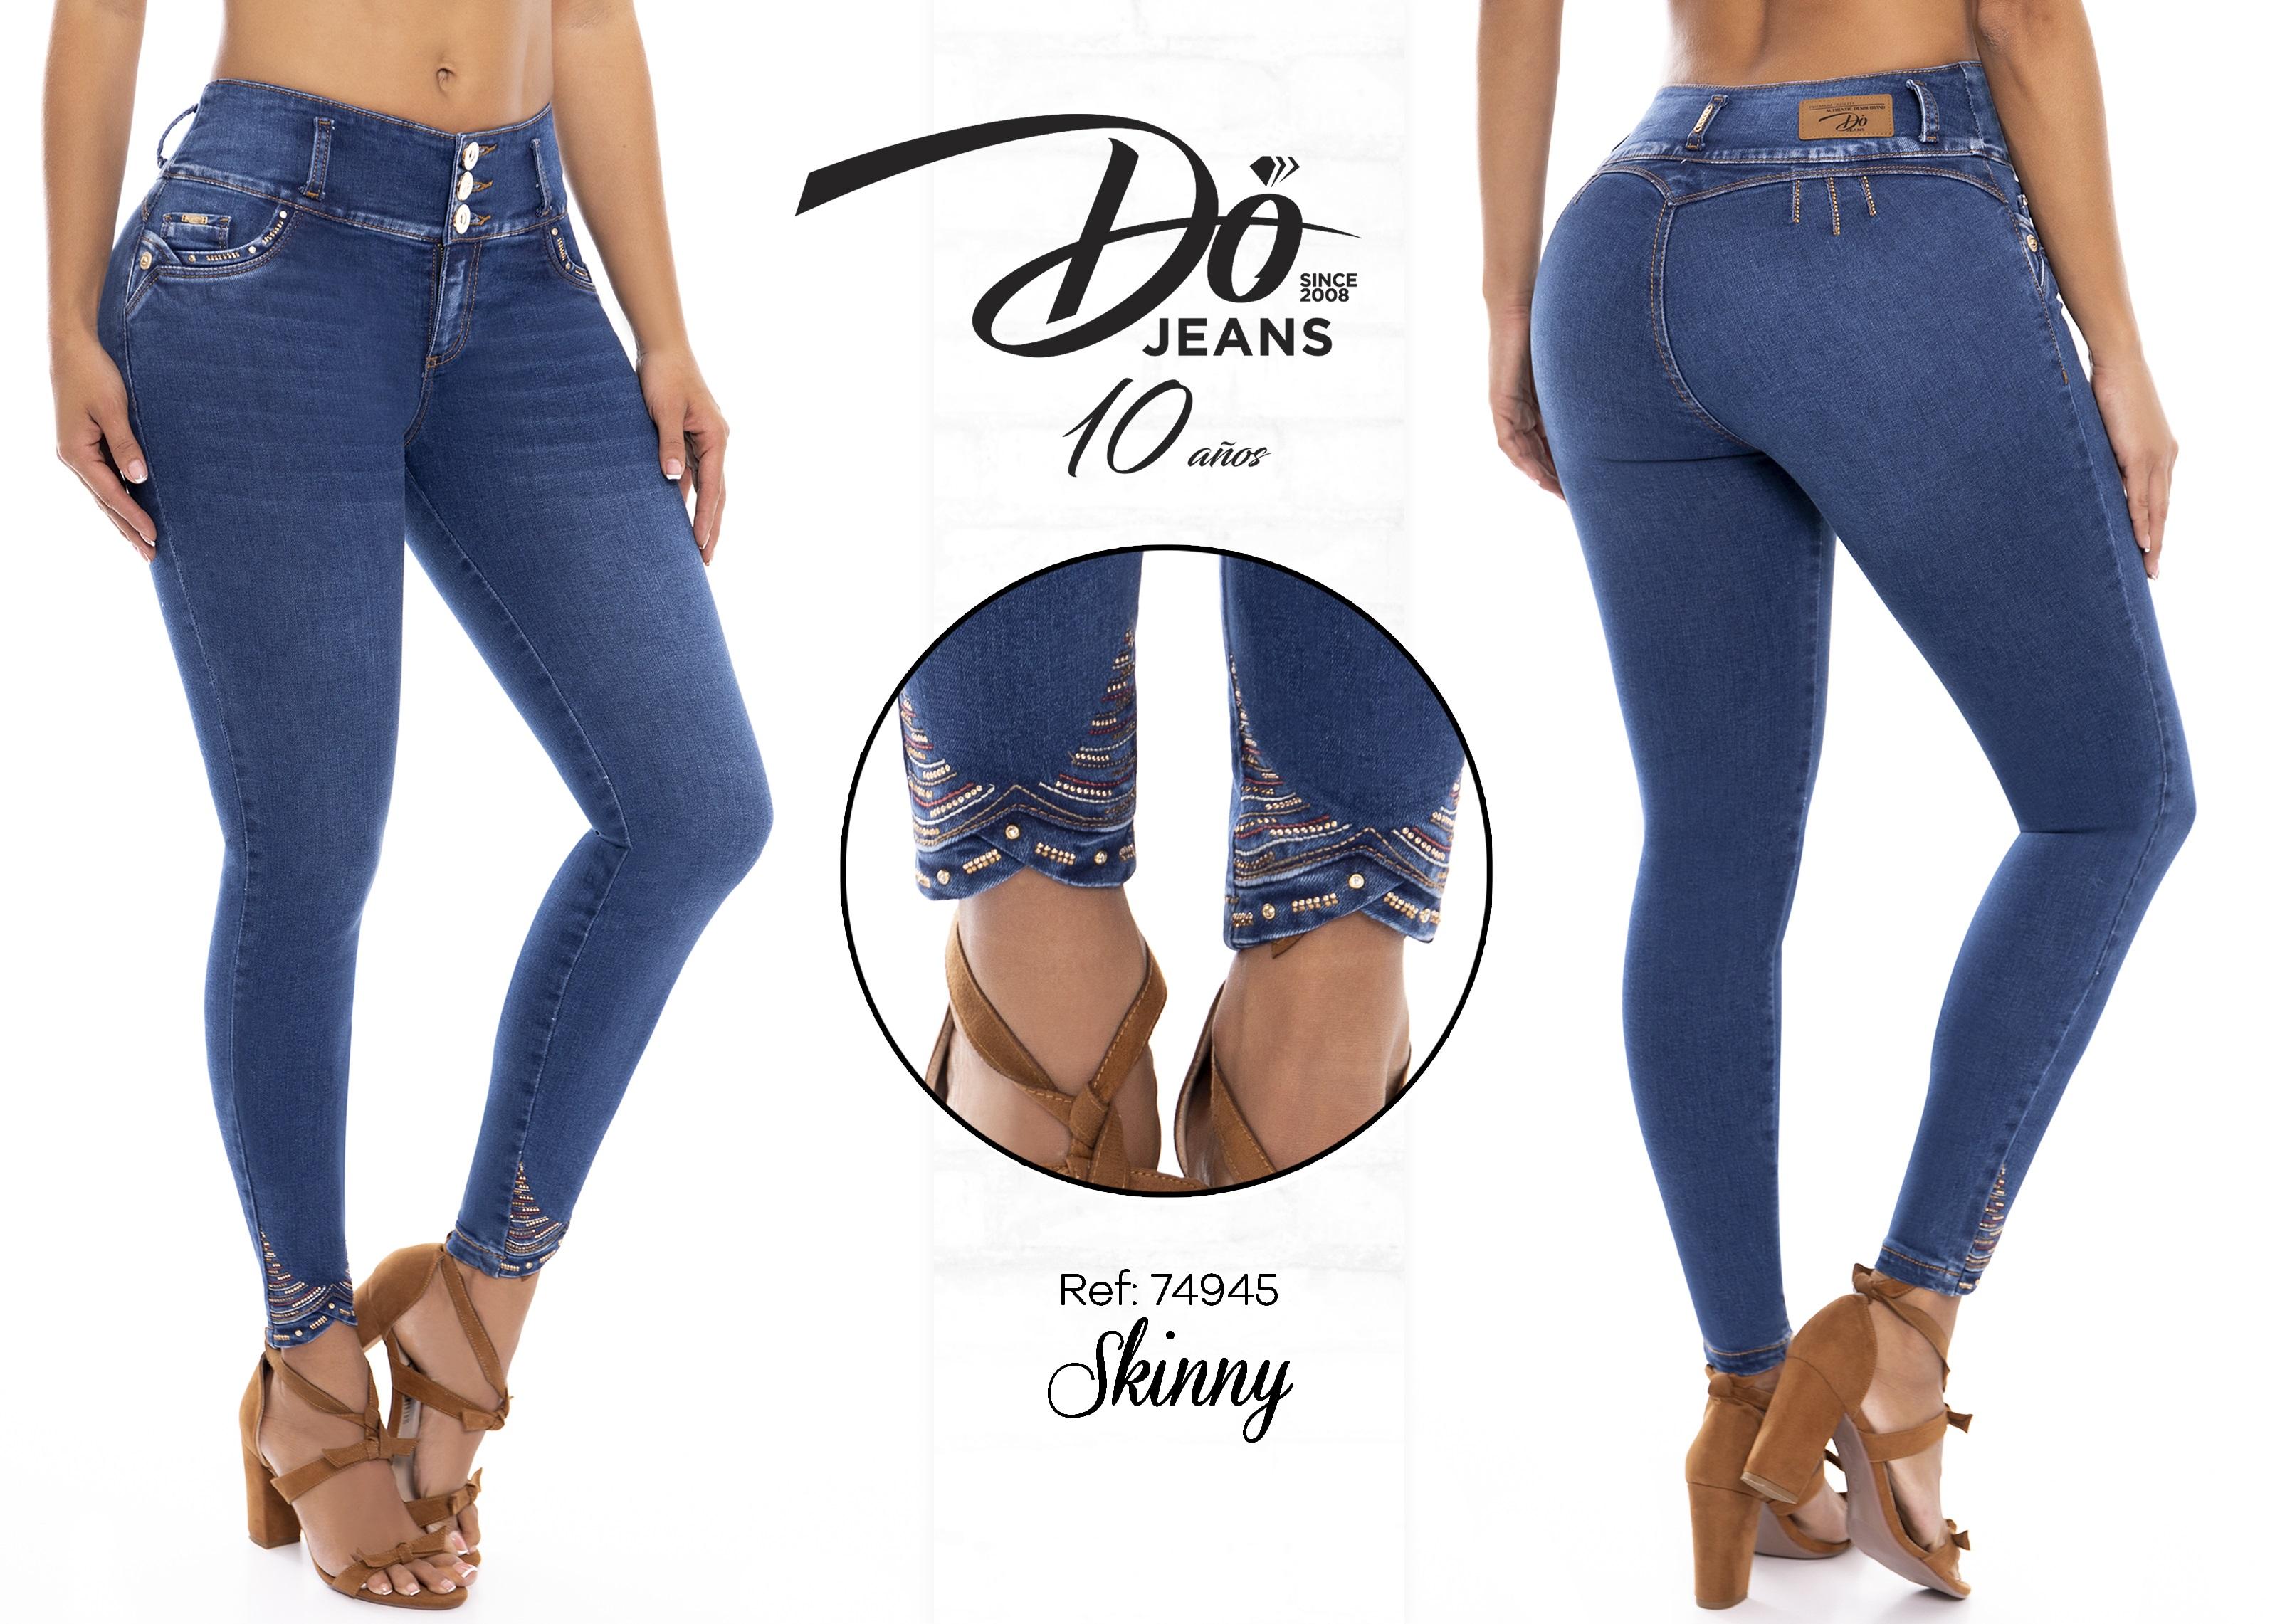 Jeans Levantacola Colombiano - Ref. 248 -74945 D